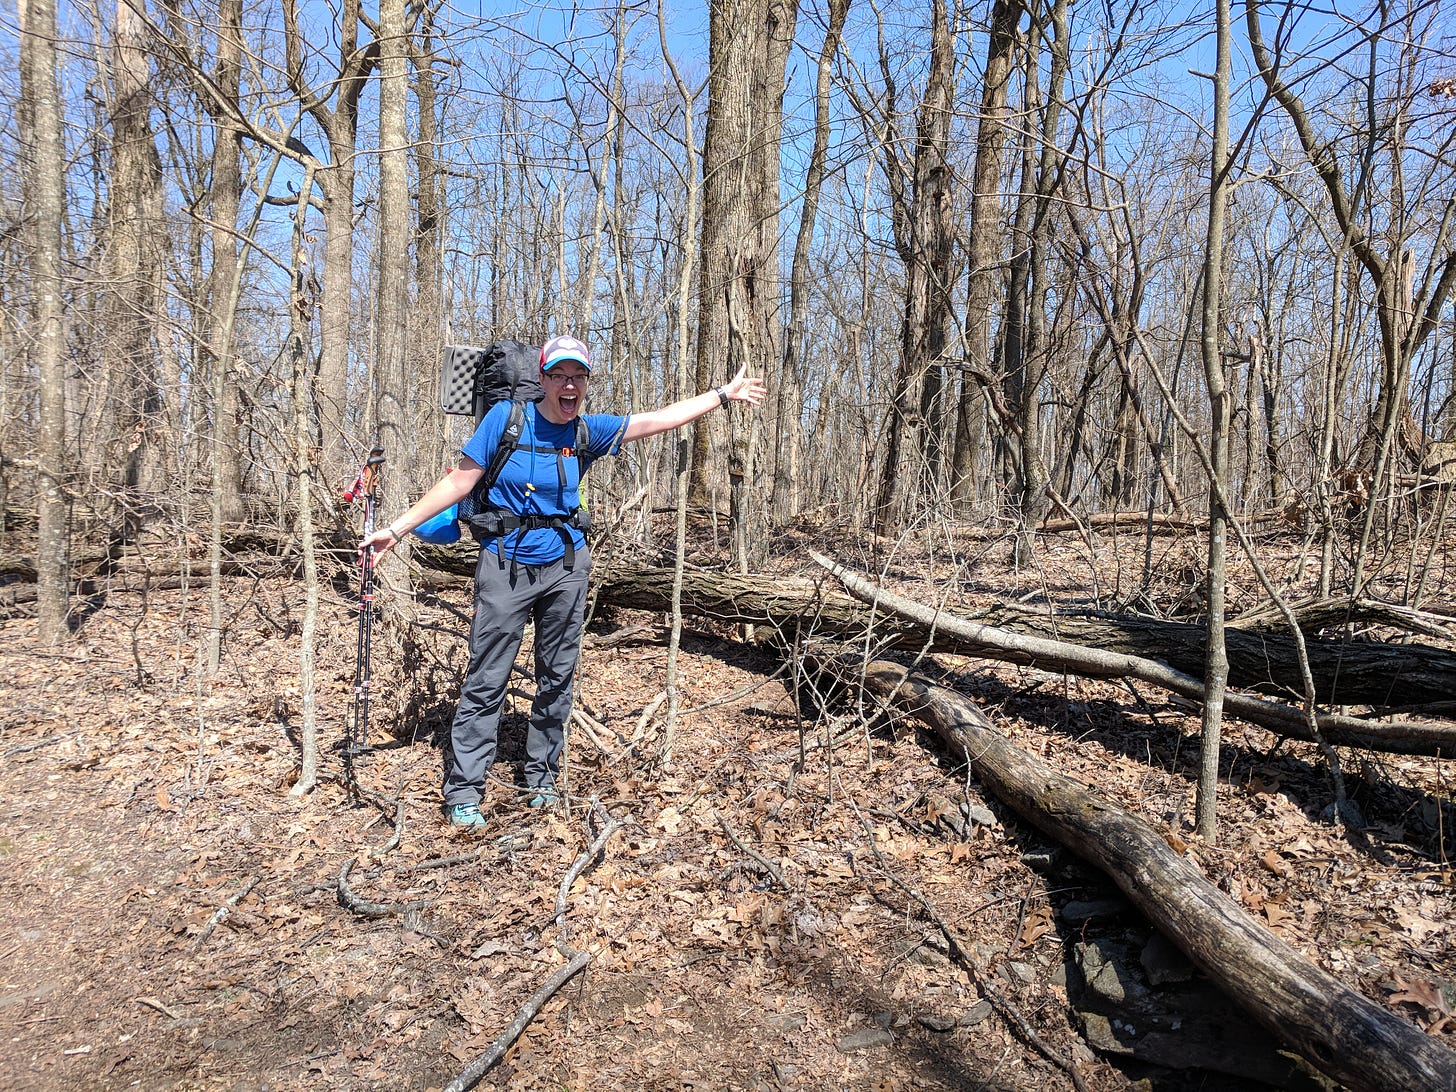 A photo of Kate on the Appalachian Trail. She wears a black backpack with a grey sleeping pad strapped to the top, carries two hiking poles, and has her arms spread wide and a big smile on her face. The scenery is boring: dead trees and trees devoid of leaves, but this is the summit of Sassafras Mountain in Georgia.